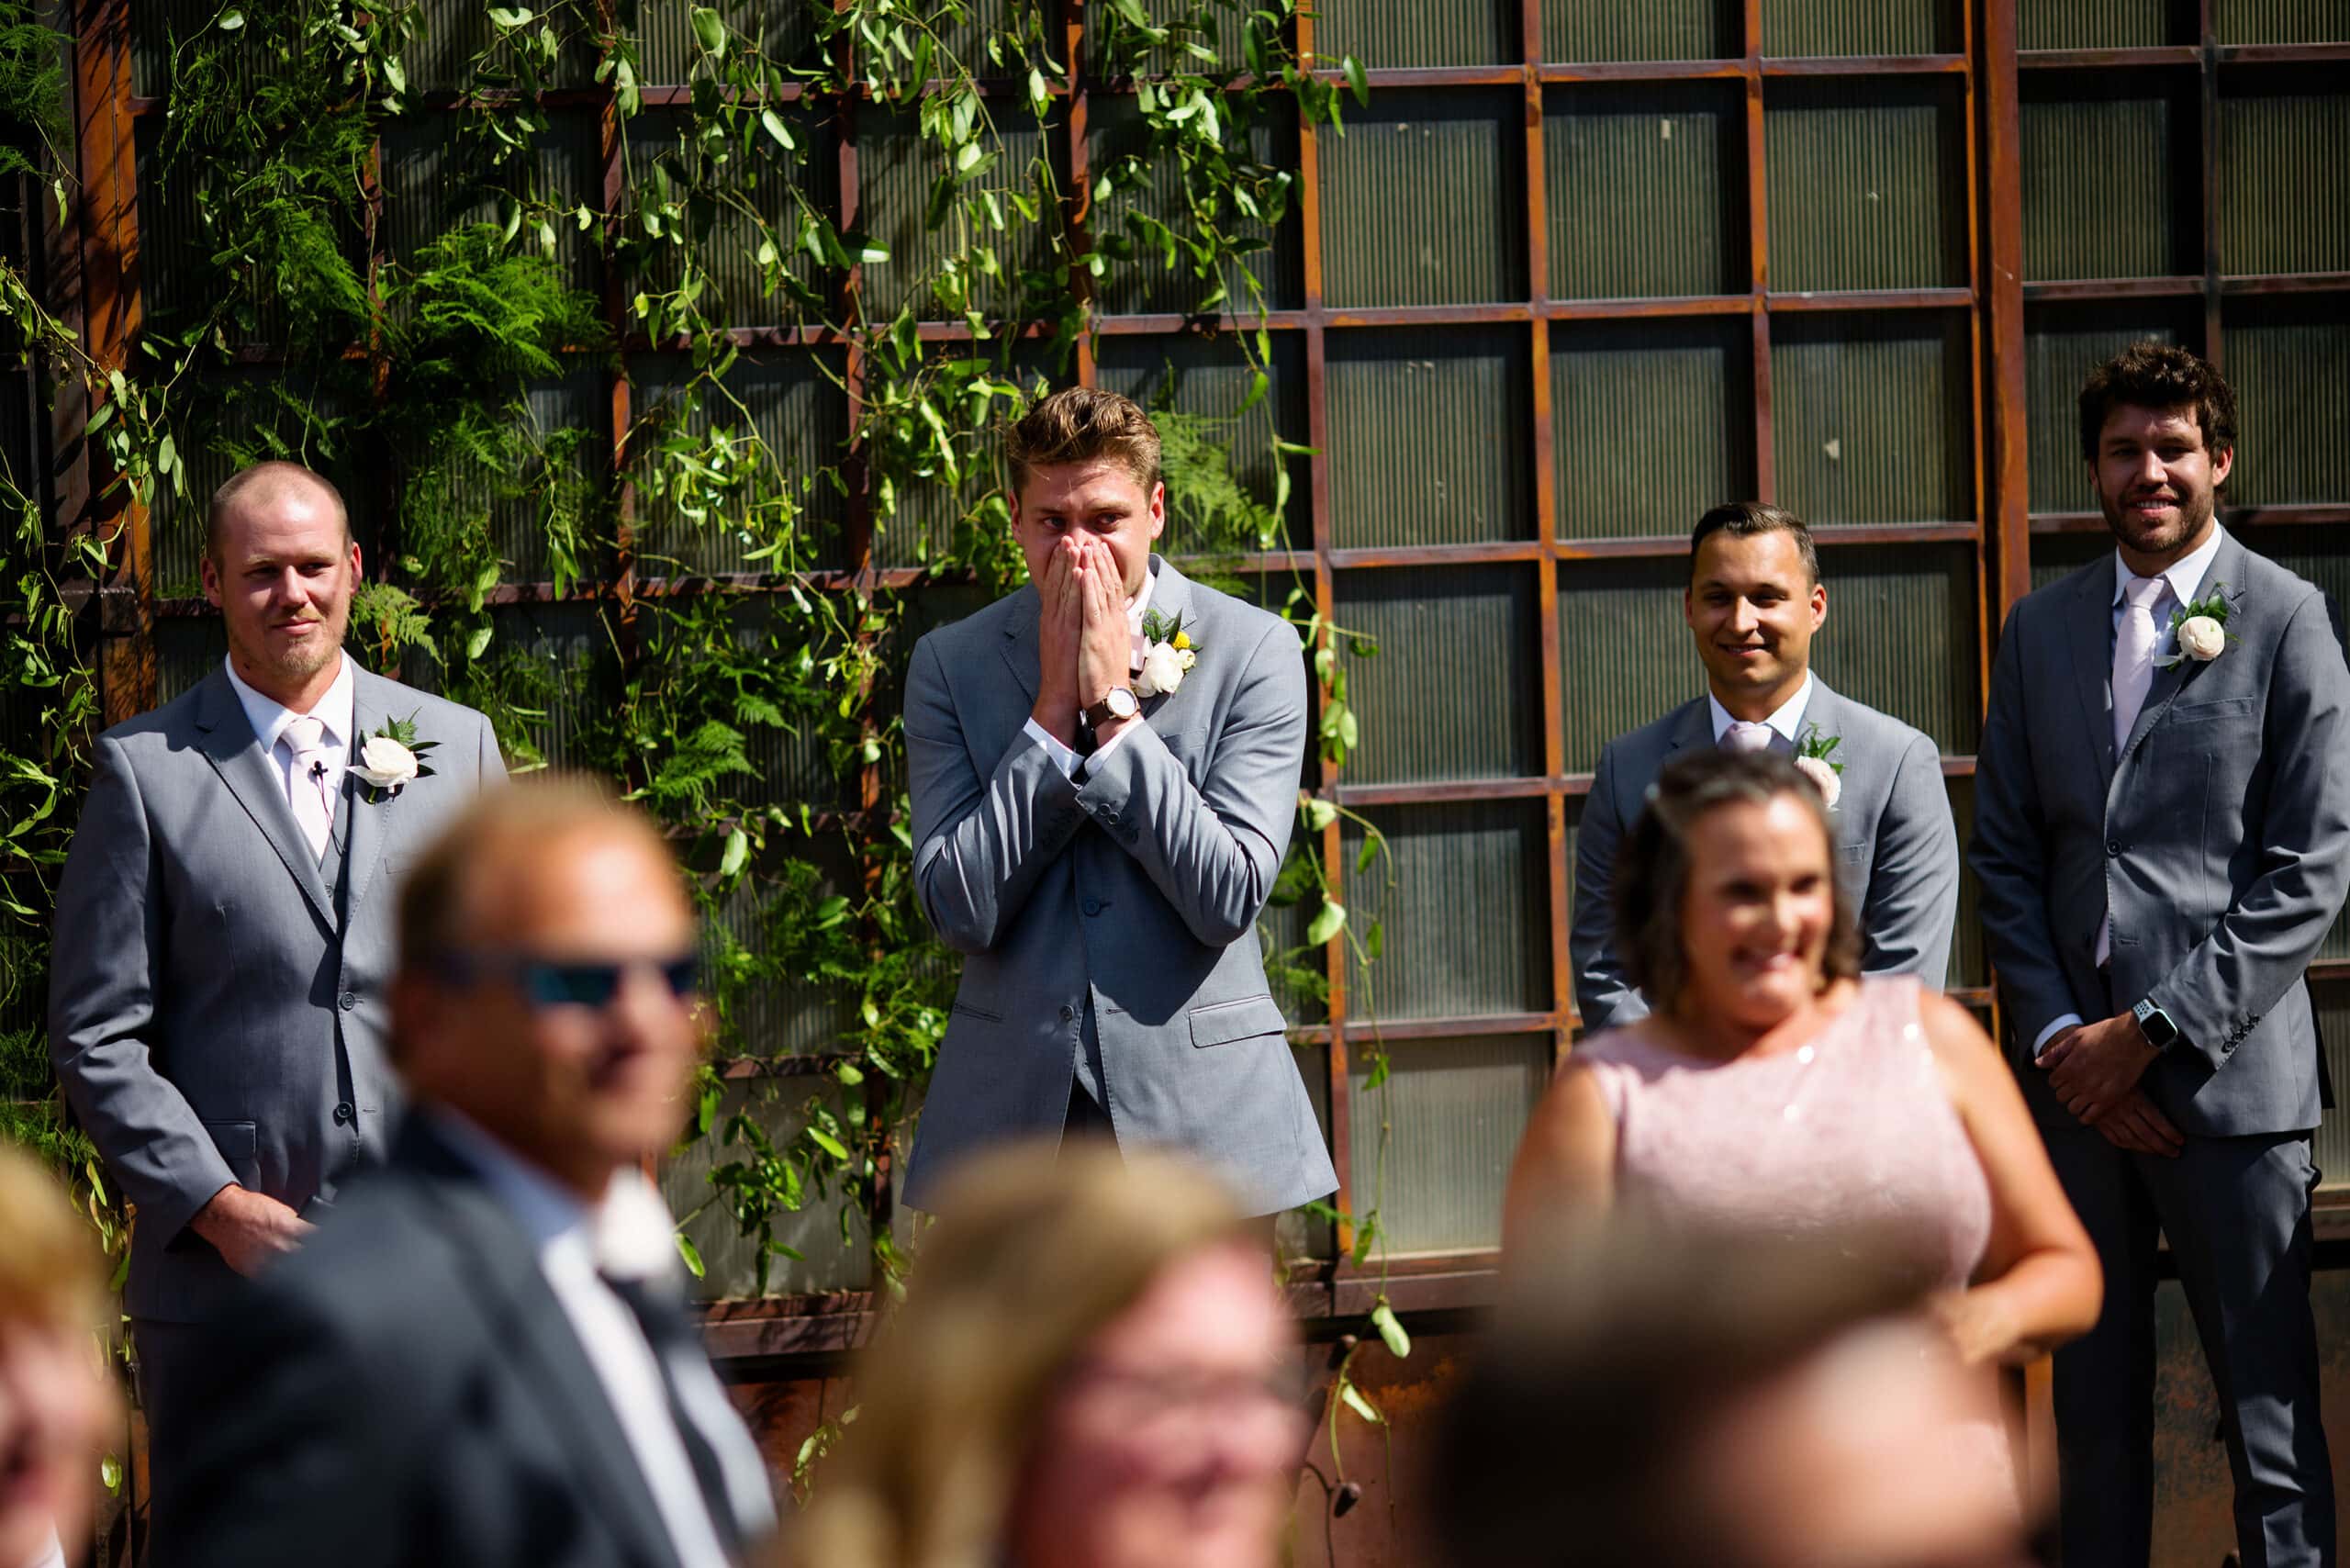 The groom reacts as the bride walks down the aisle